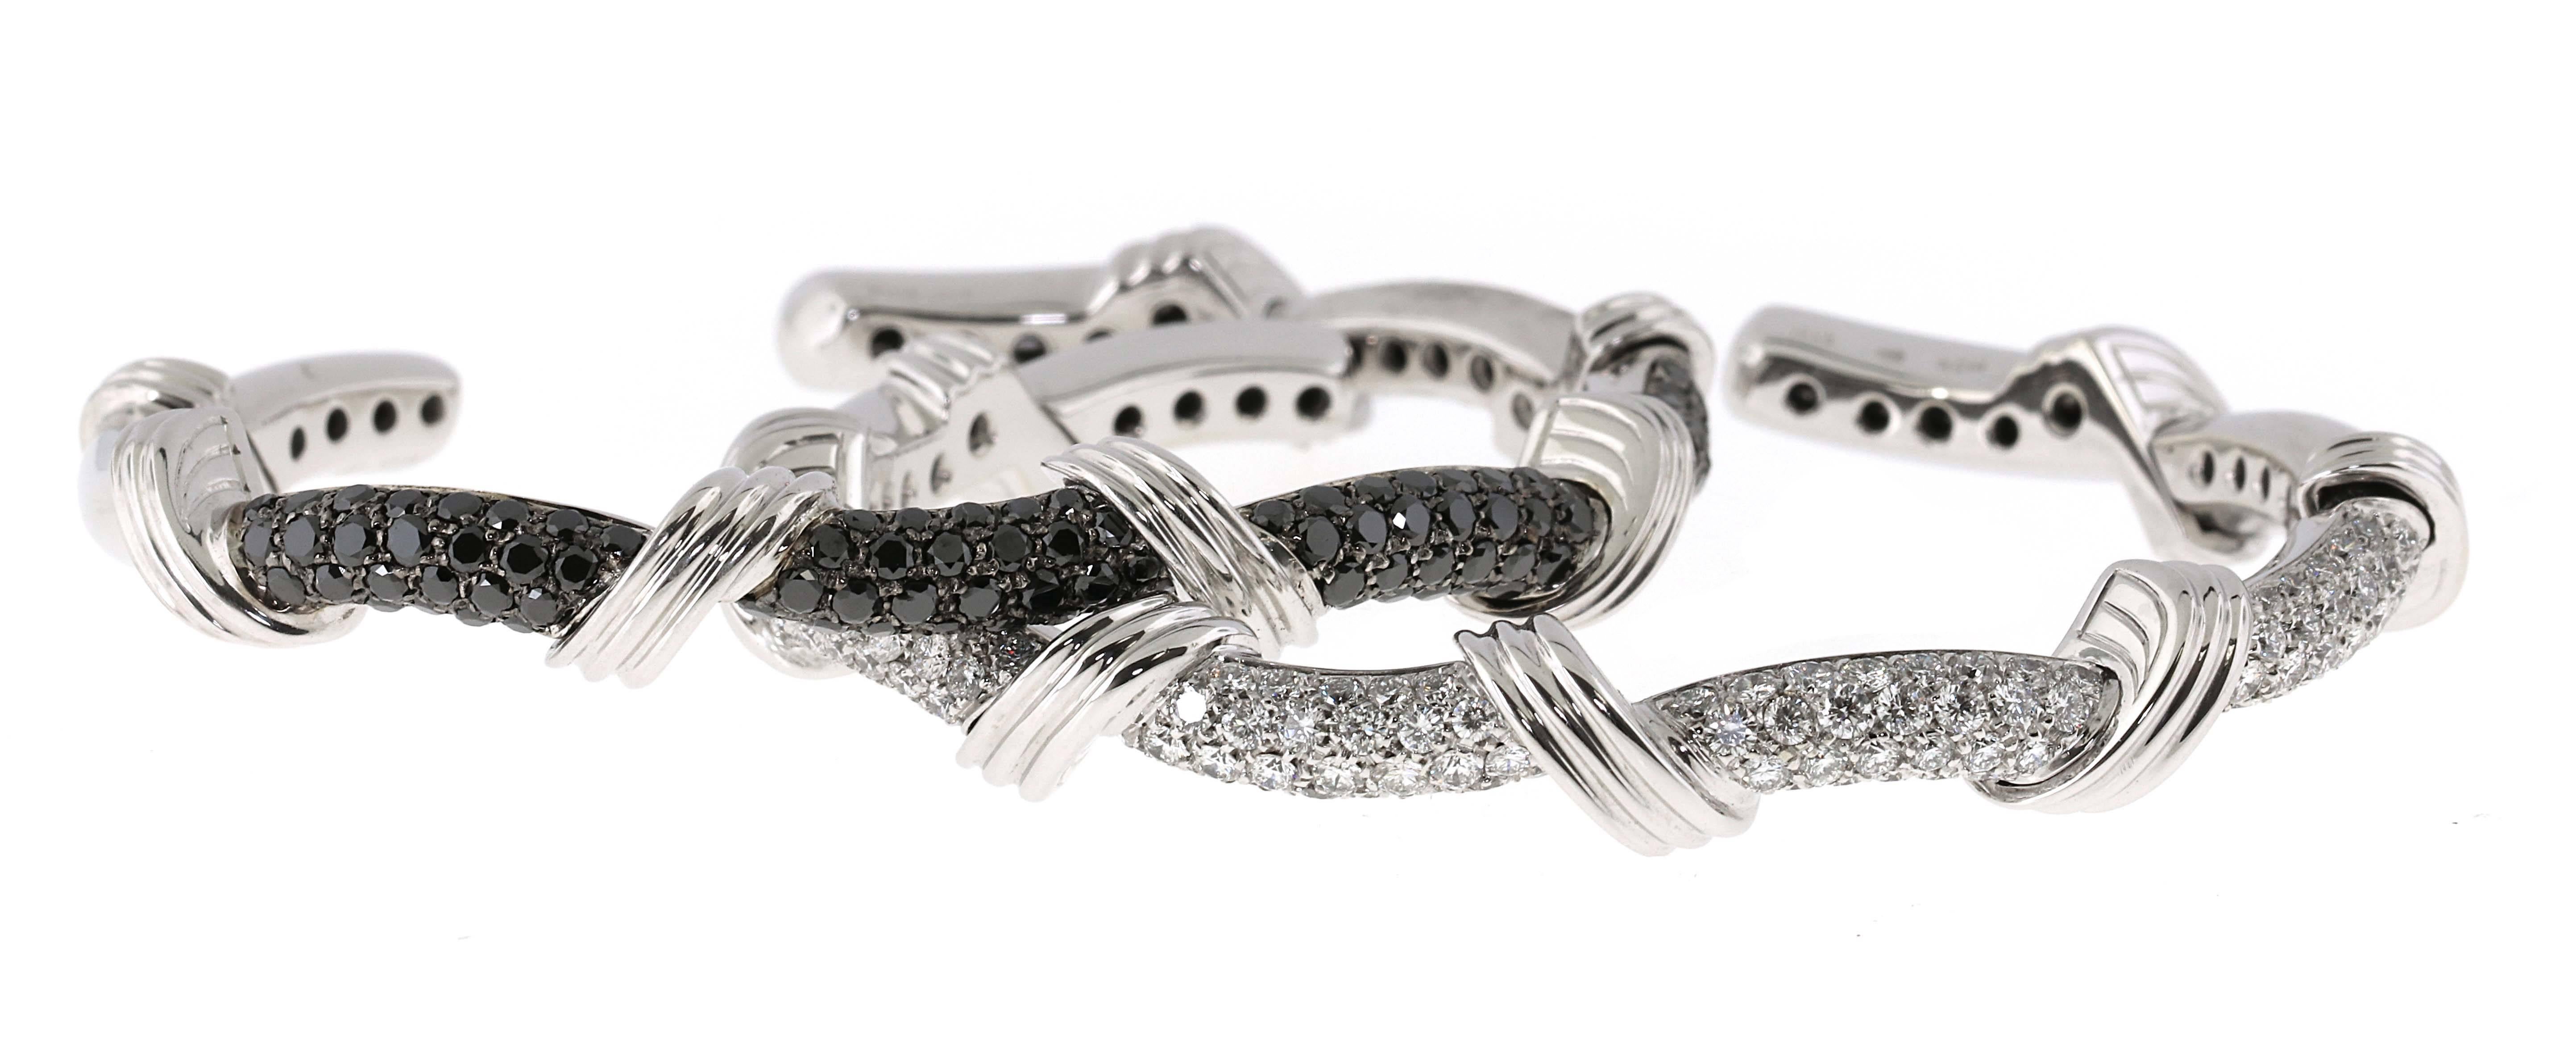 Fantastic looking pair of White and Black diamond bangles set in 18kt white gold. These are not 14kt white gold but rather 18kt making them a sturdier higher quality pair of bangles. Each bangle contains over 100 diamonds individually set to create